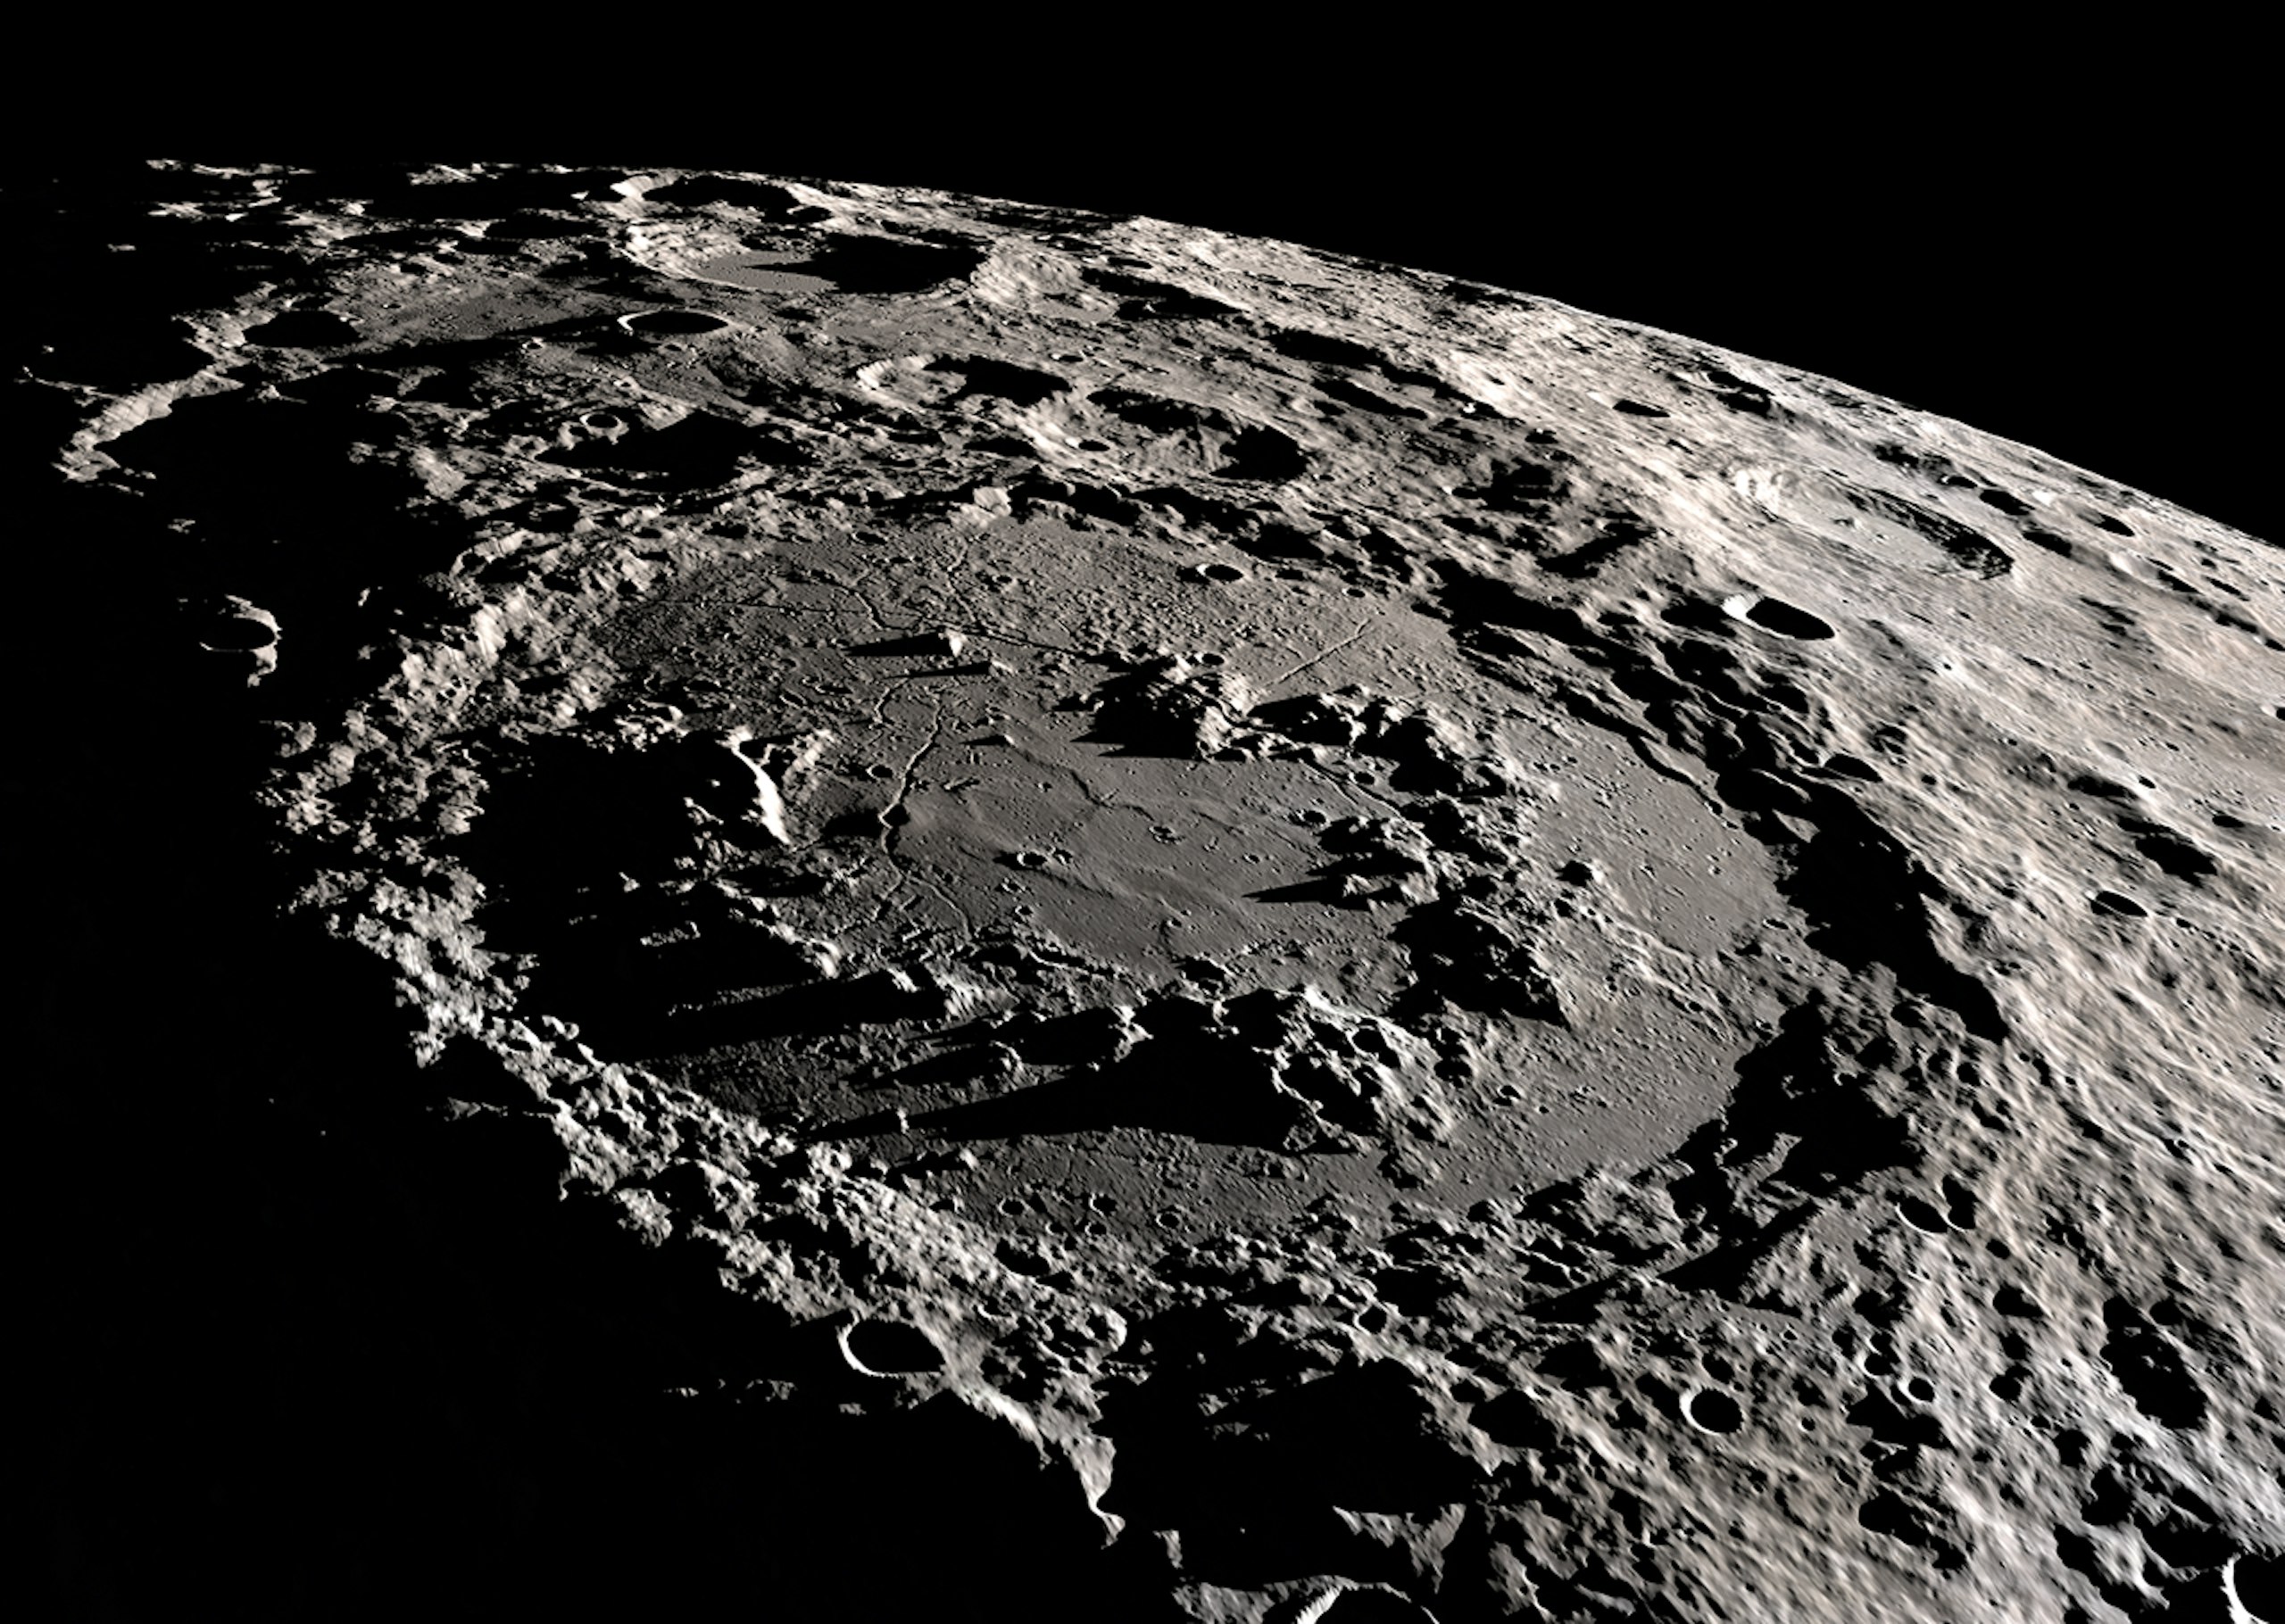 The moon's Schrödinger basin. According to lunar convention, craters more than 186 miles across are called basins.